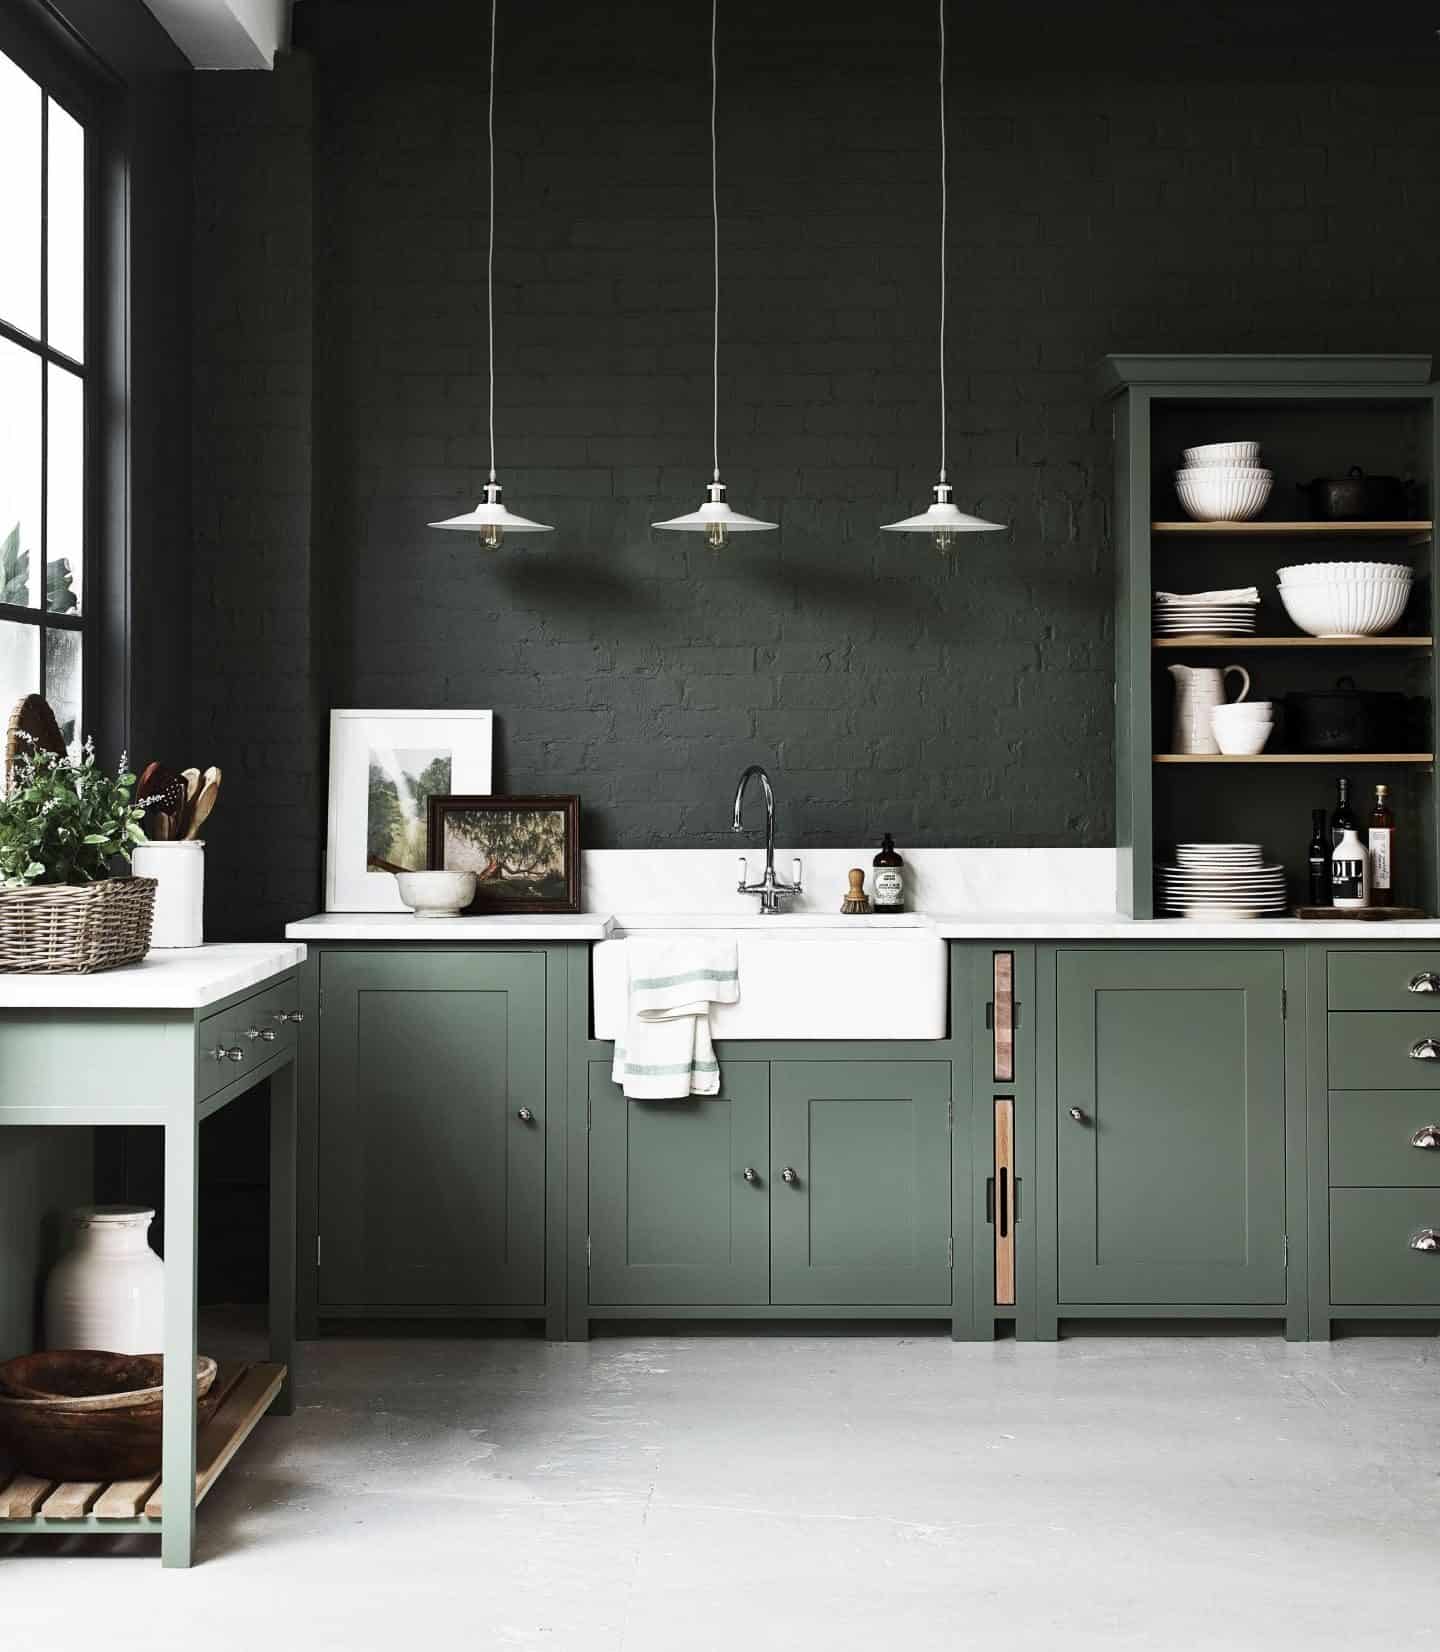 Neptune Suffolk kitchen hand-painted in Cactus from £12,000